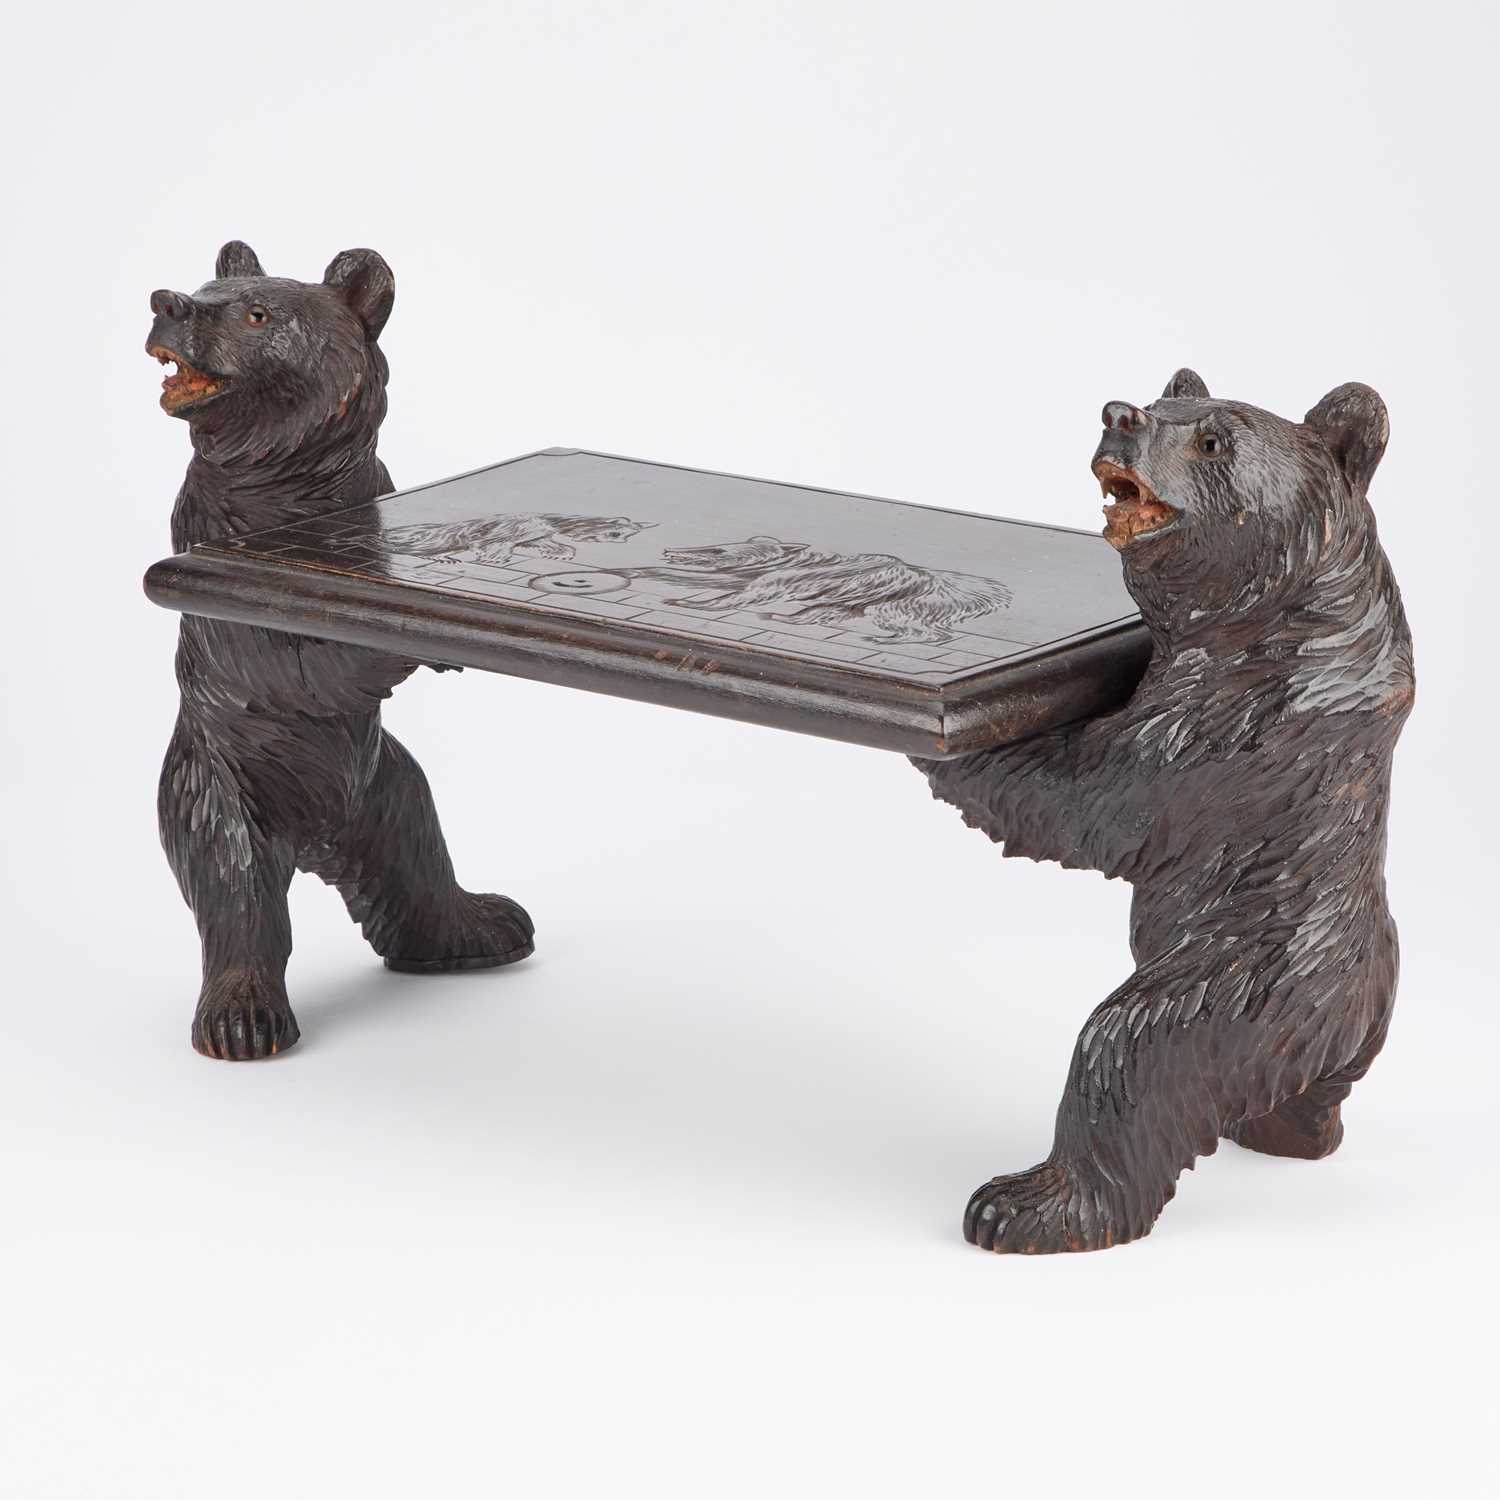 A BLACK FOREST MINIATURE 'BEAR' BENCH OR TABLE, LATE 19TH CENTURY - Image 2 of 3